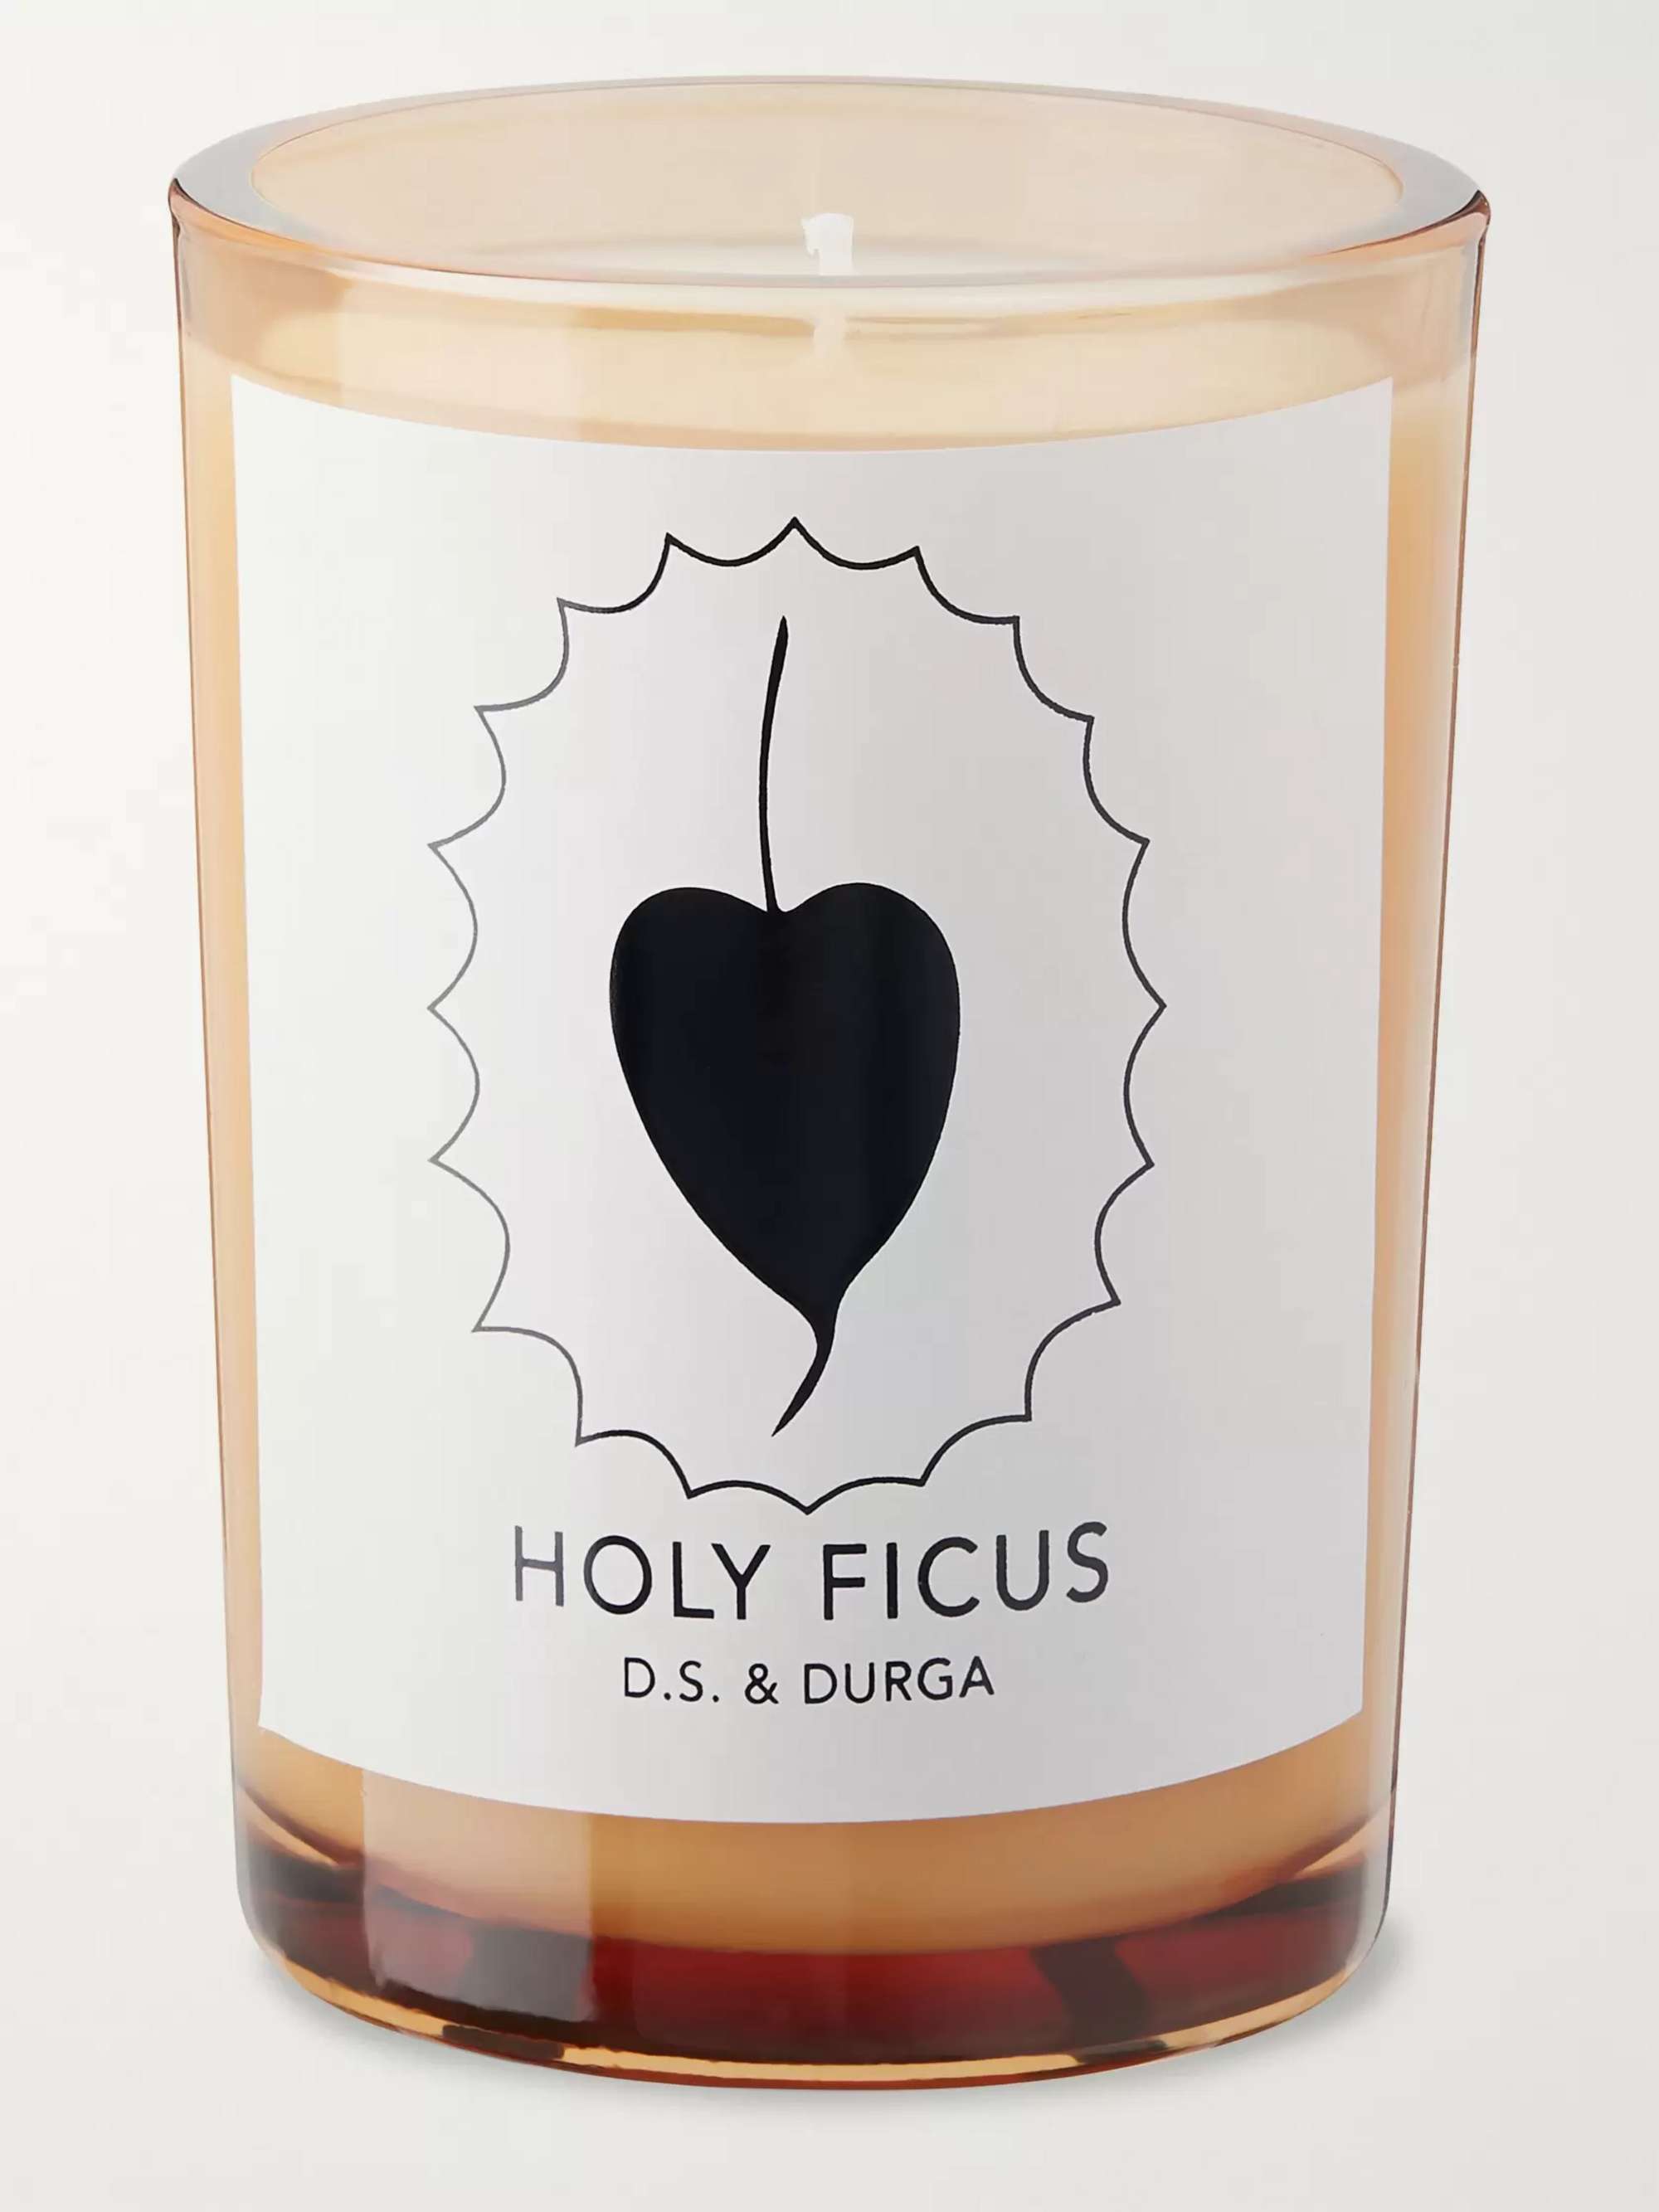 D.S. & DURGA Holy Ficus Scented Candle, 200g